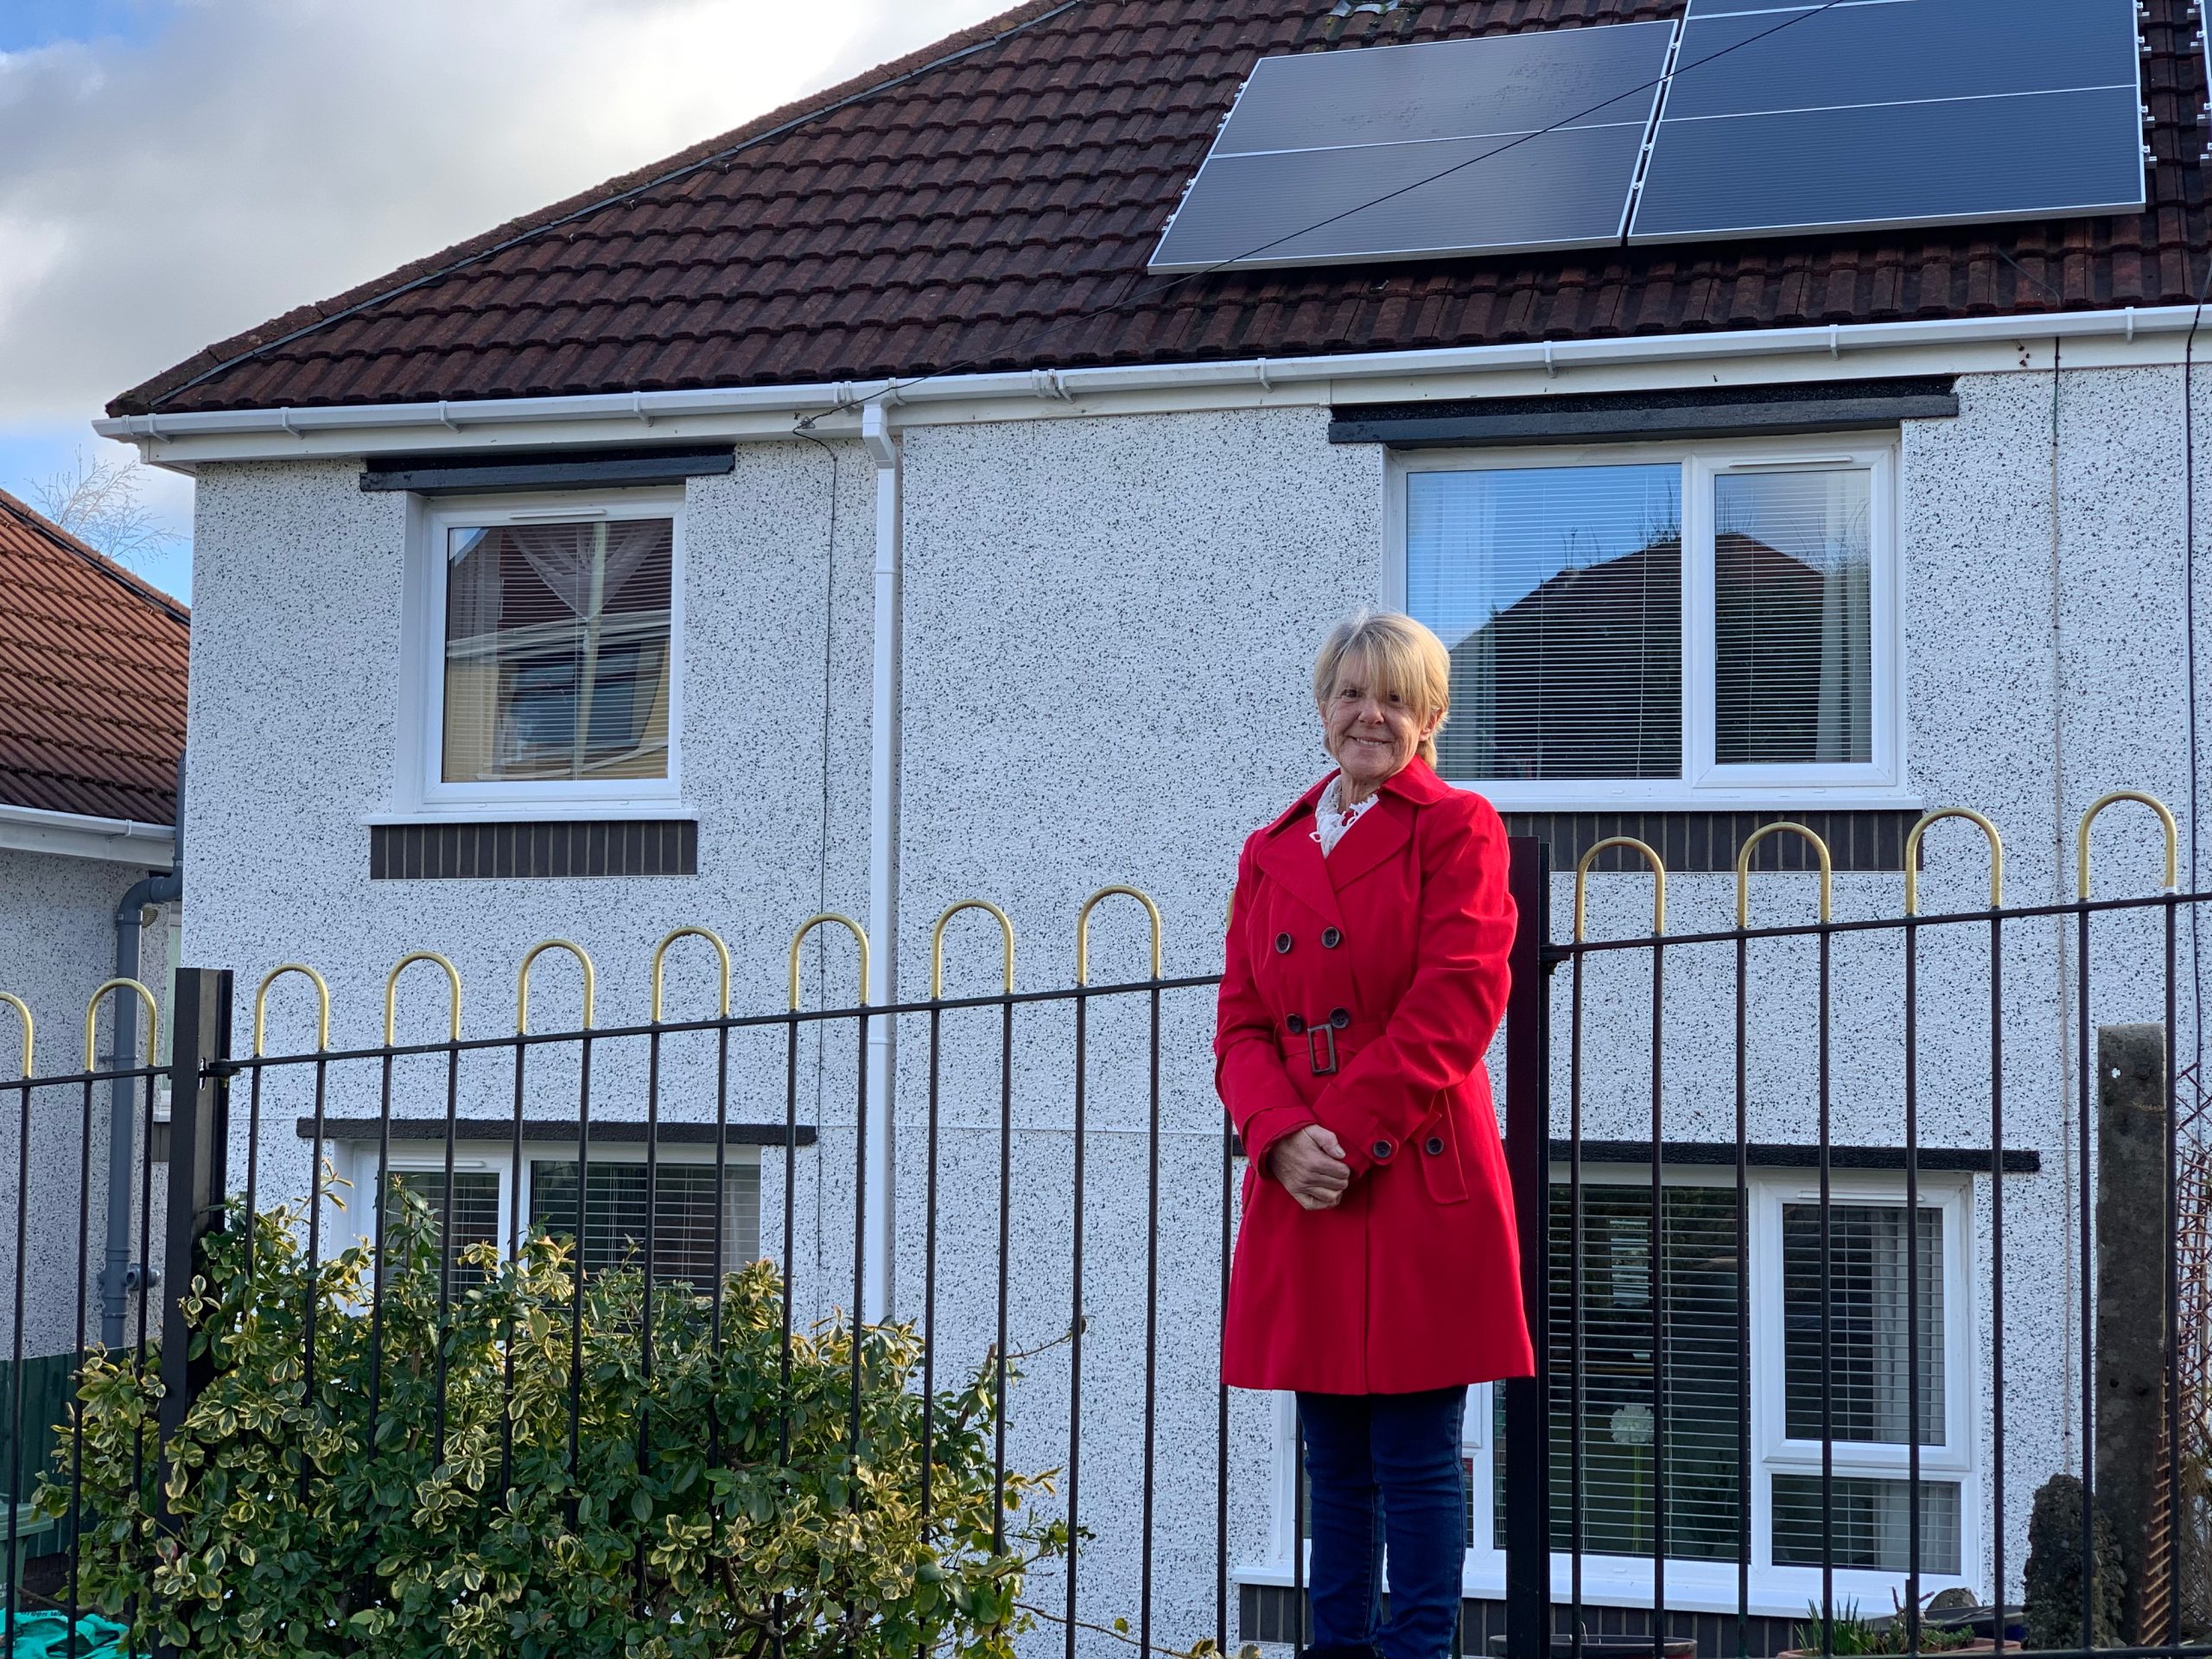 Trivallis Housing Landlord Wales A woman in a red coat standing in front of a white two-story house with solar panels on the roof.